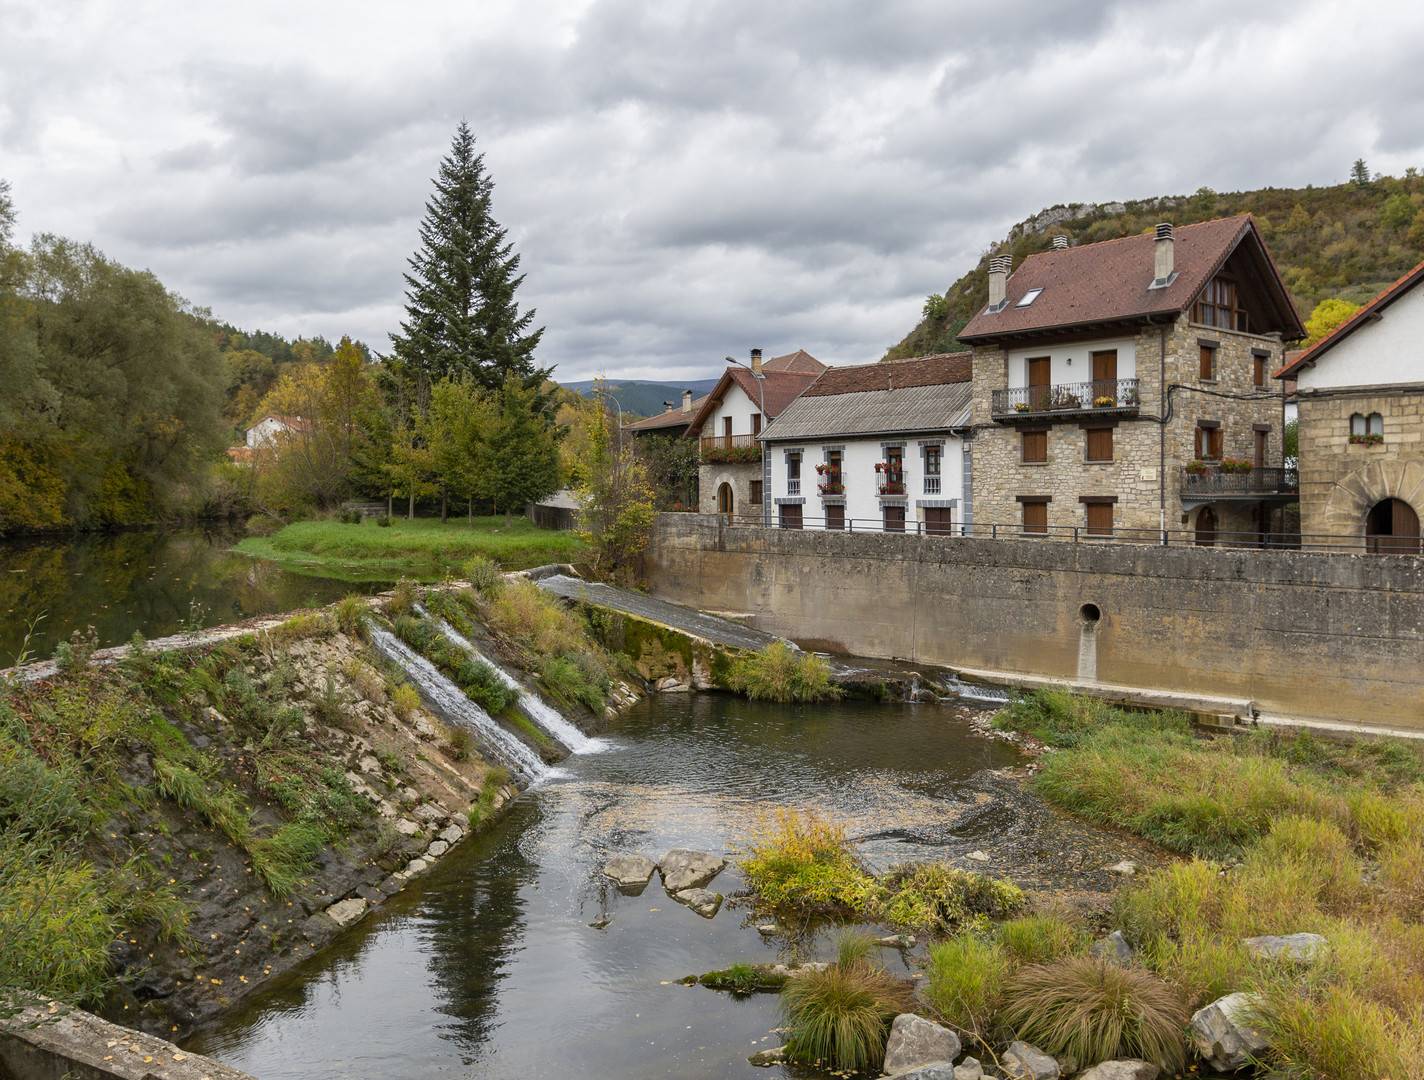 Typical village with river